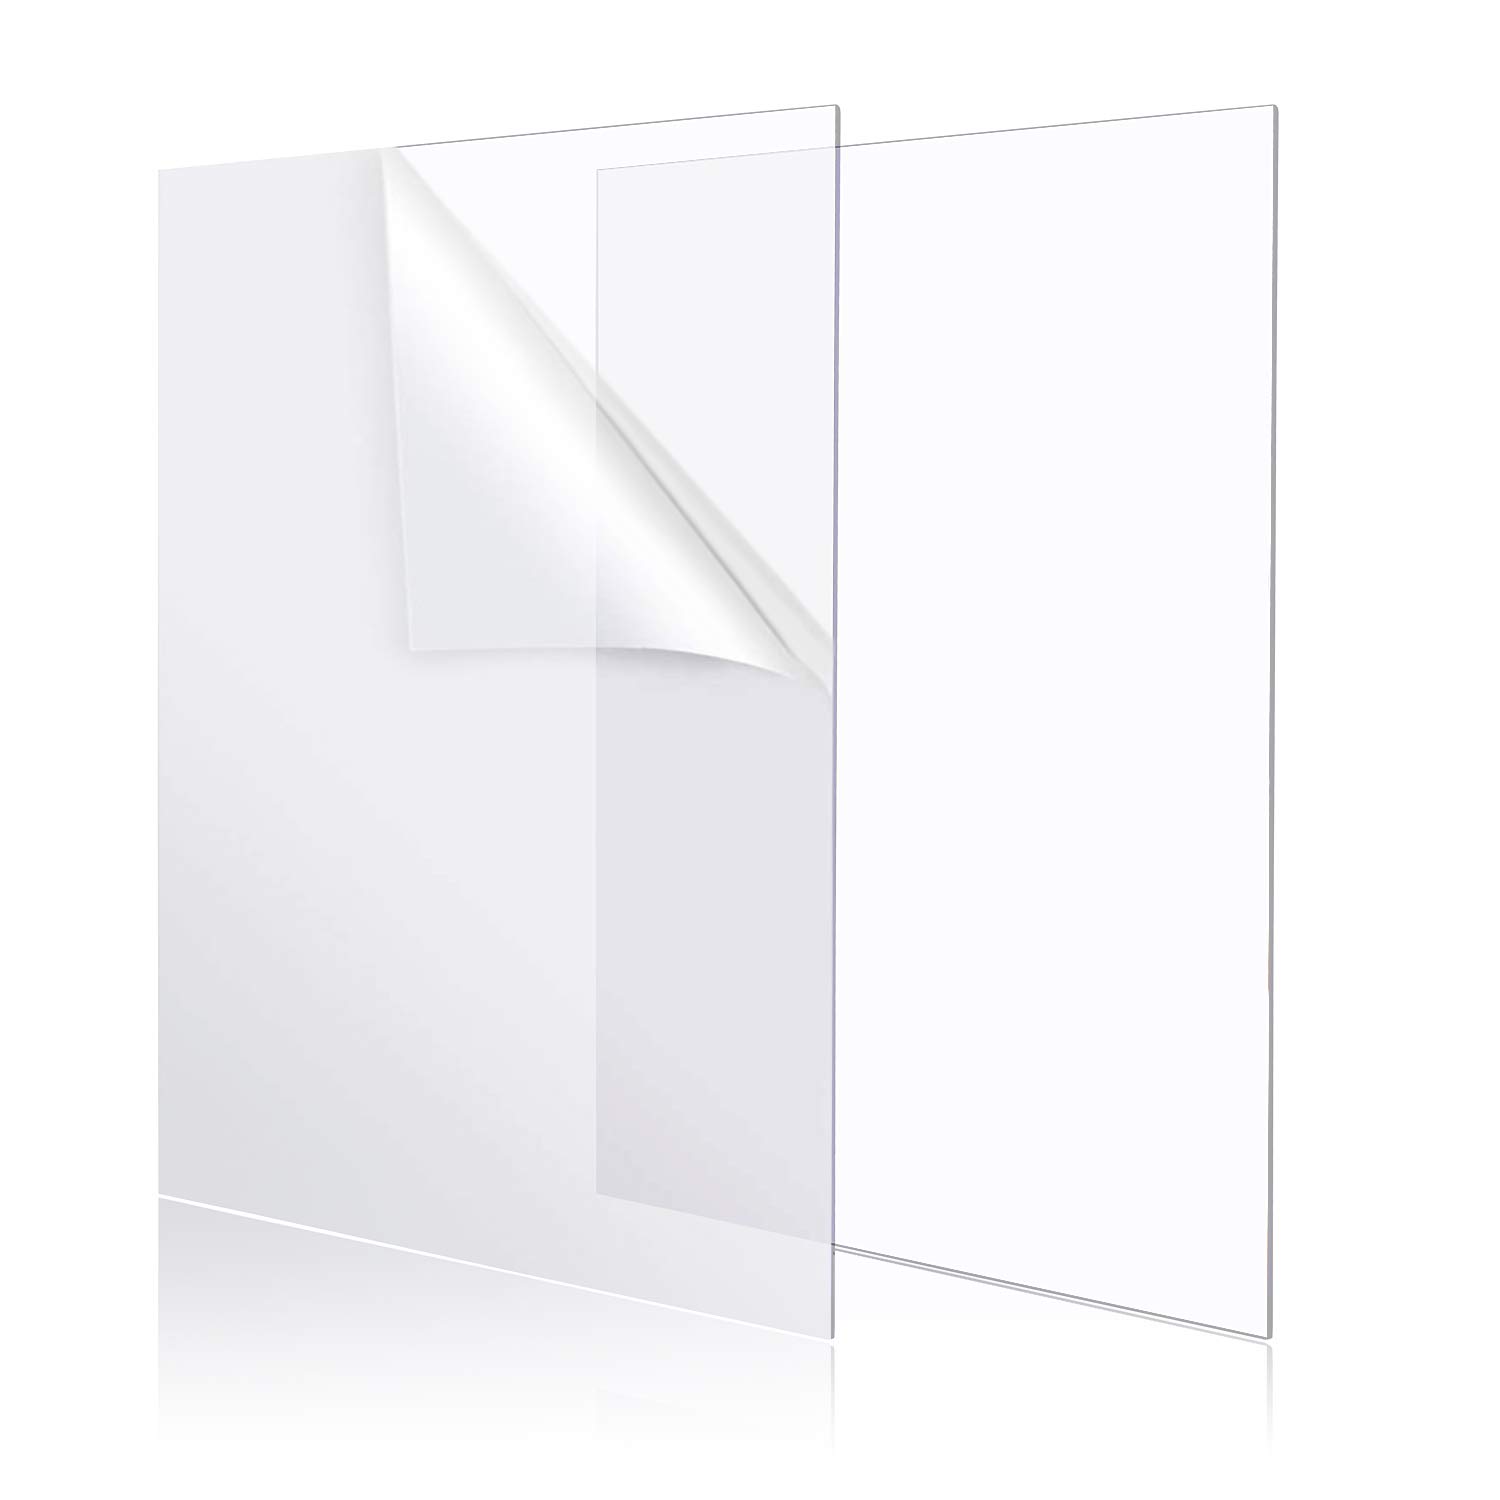 Ystime 8 x 12 Clear Acrylic Sheet Plexiglass Plastic Sheet for Crafts Transparent Acrylic Board with Protective Paper for Craft, Windows, Frame, DIY